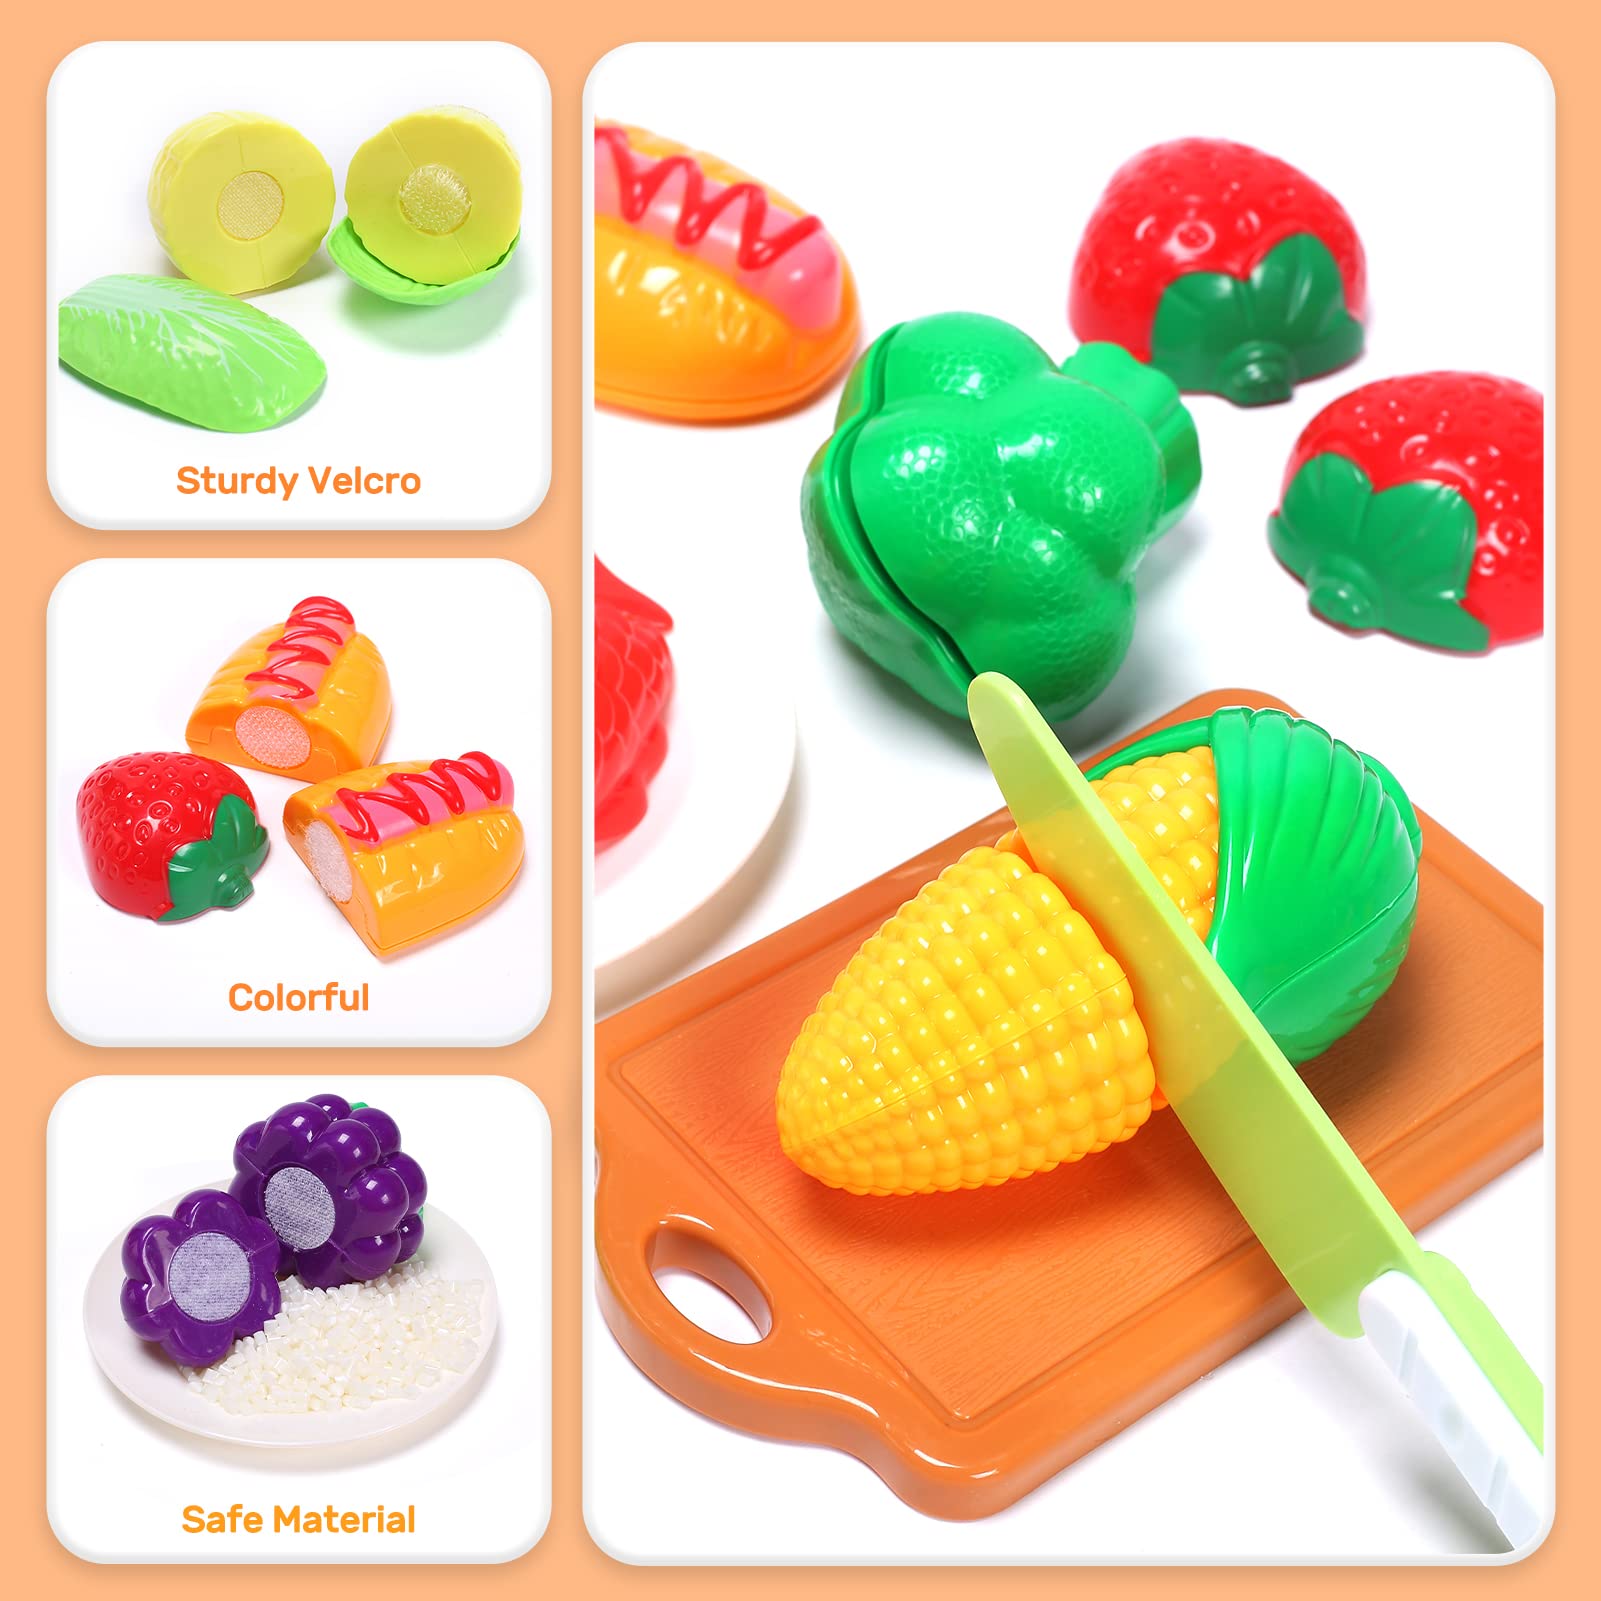 Cute Stone CUTE STONE Pretend Play Kitchen Toys with Stainless Steel  Cookware Pots and Pans Set, Toy Cooking Utensils, Apron, Cutting